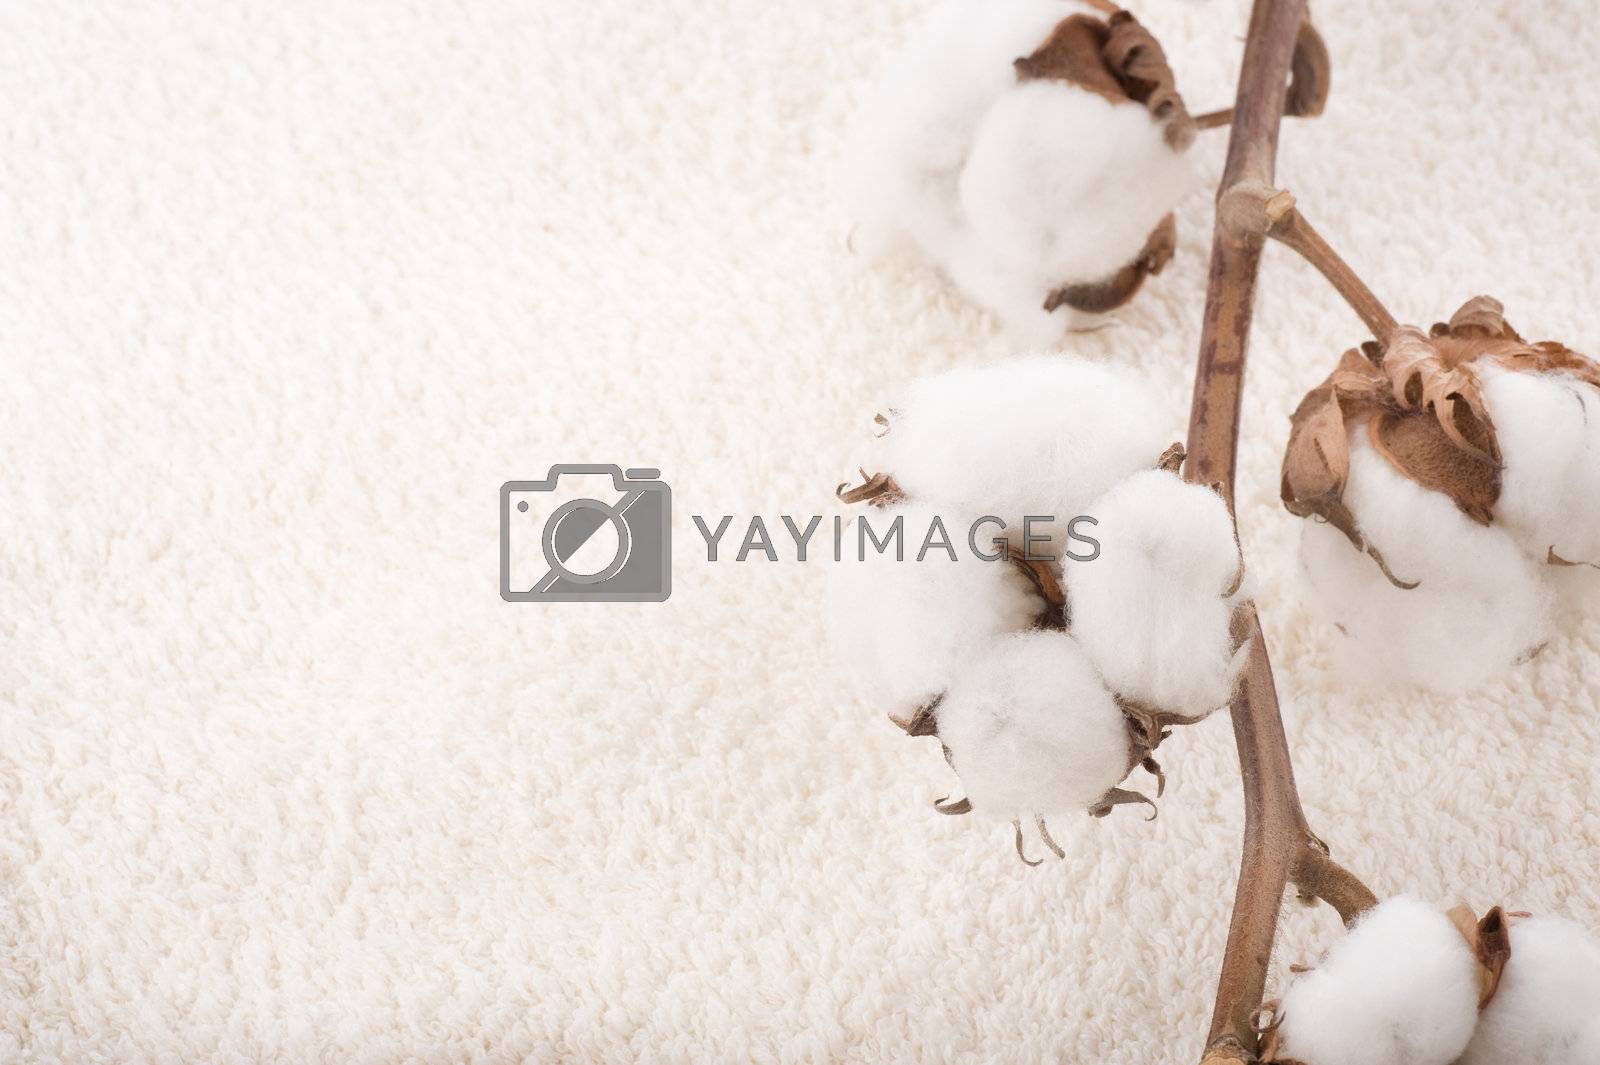 Royalty free image of Cotton Plant On A Fluffy Towel  by SubbotinaA